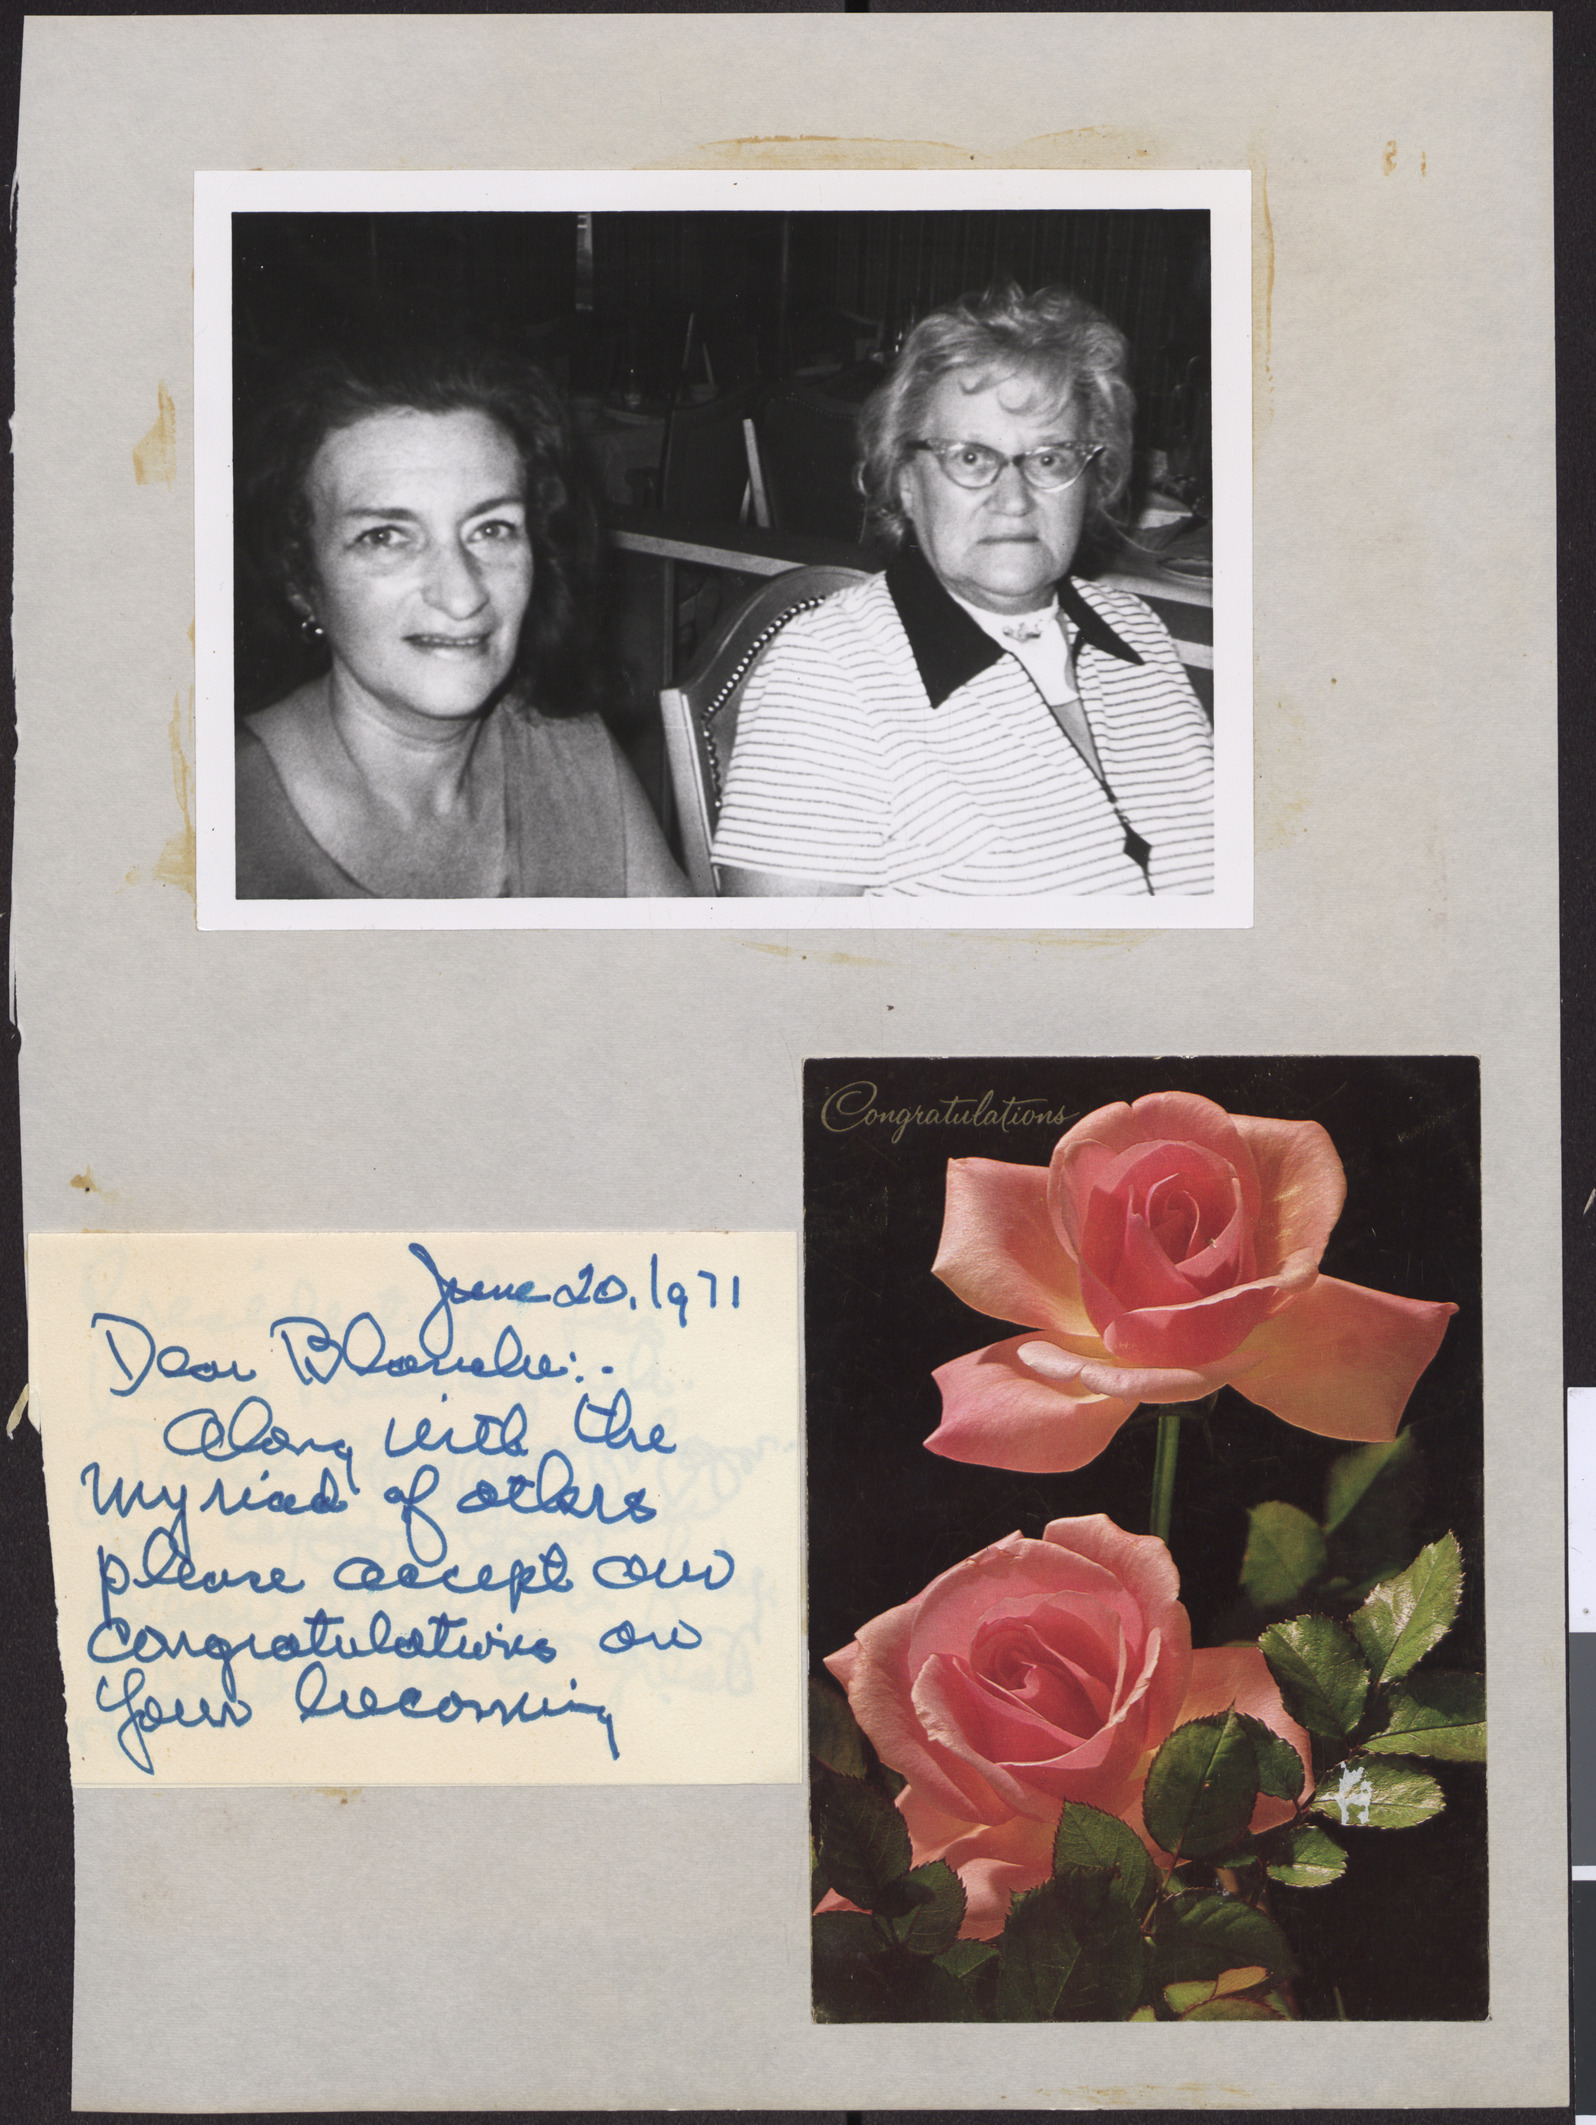 Photograph of Hadassah members, and note of congratulations to Blanche Stein, June 20, 1971, and Congratulations greeting card